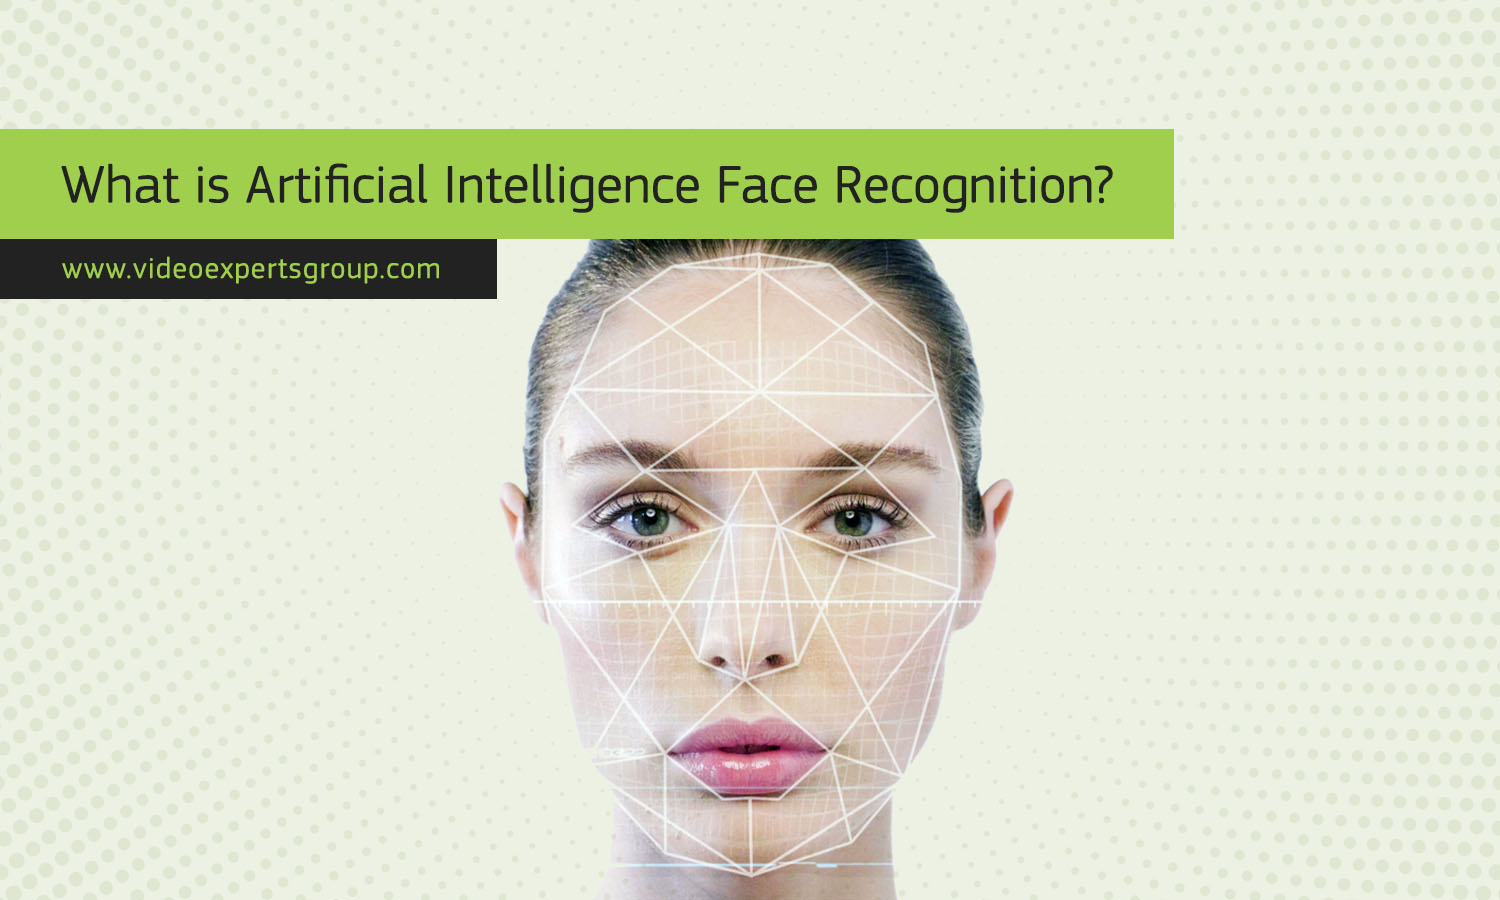 What is AI Face Recognition?